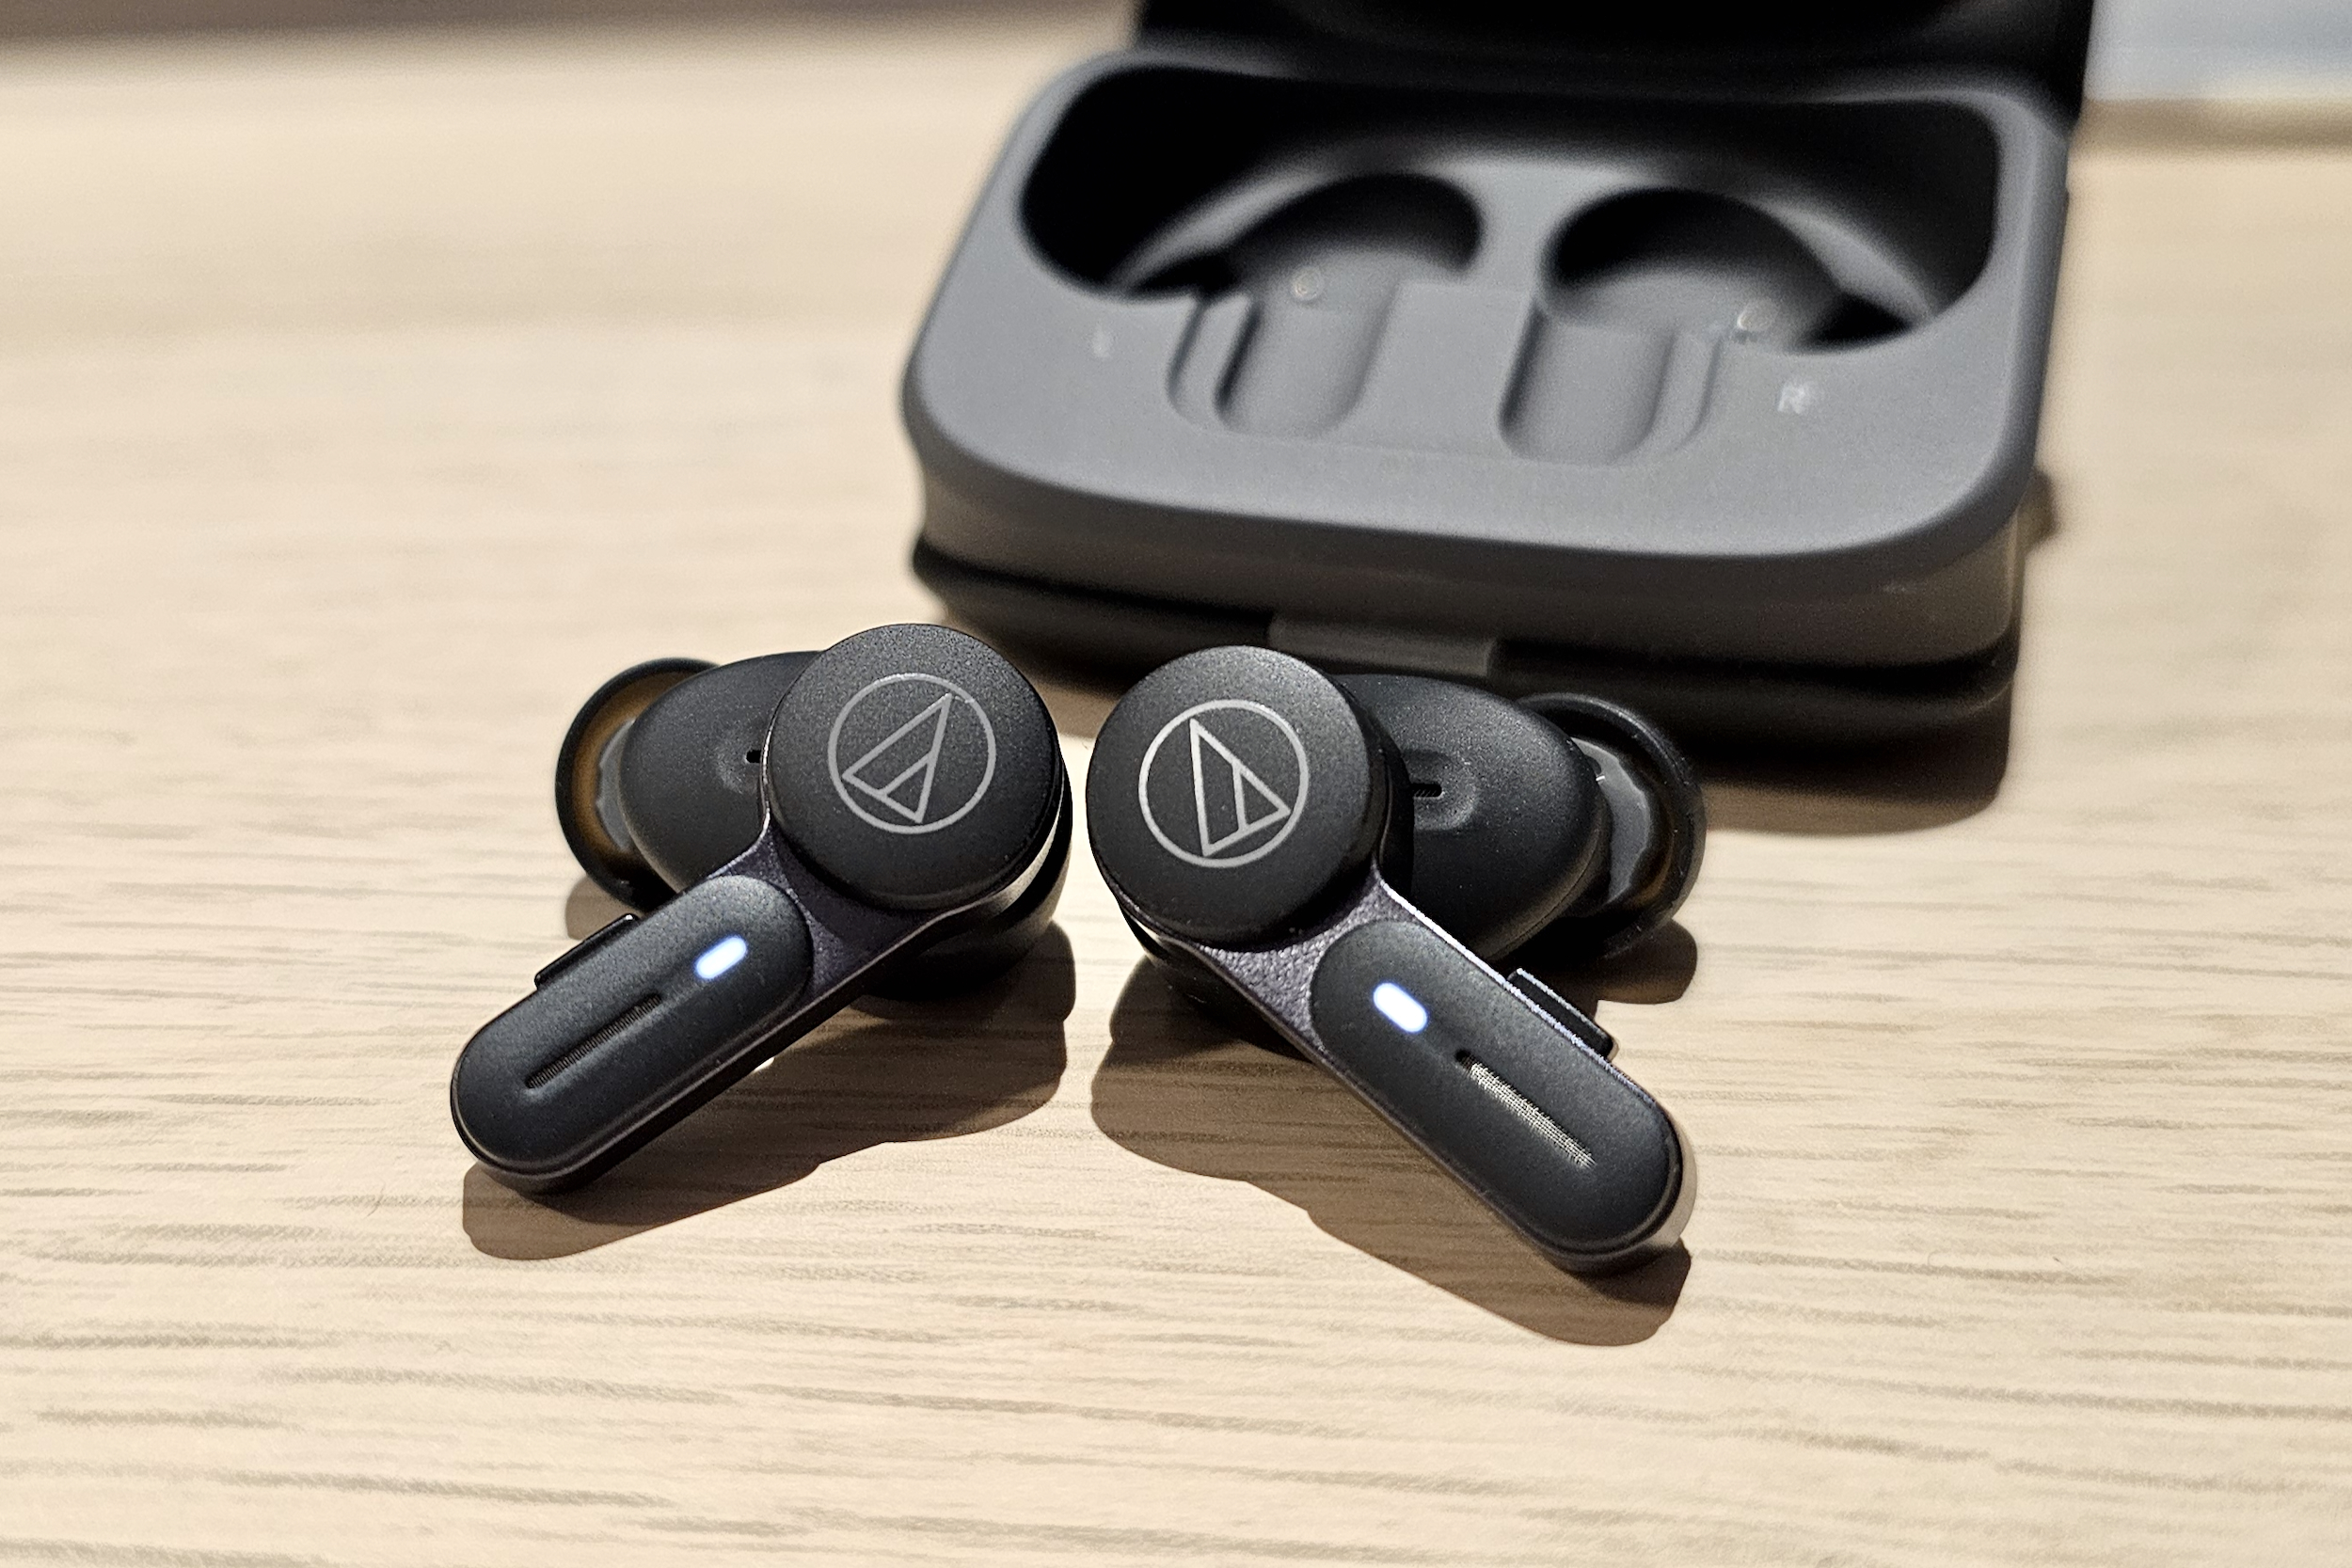 Audio-Technica ATH-TWX7, both earbuds in front of case.